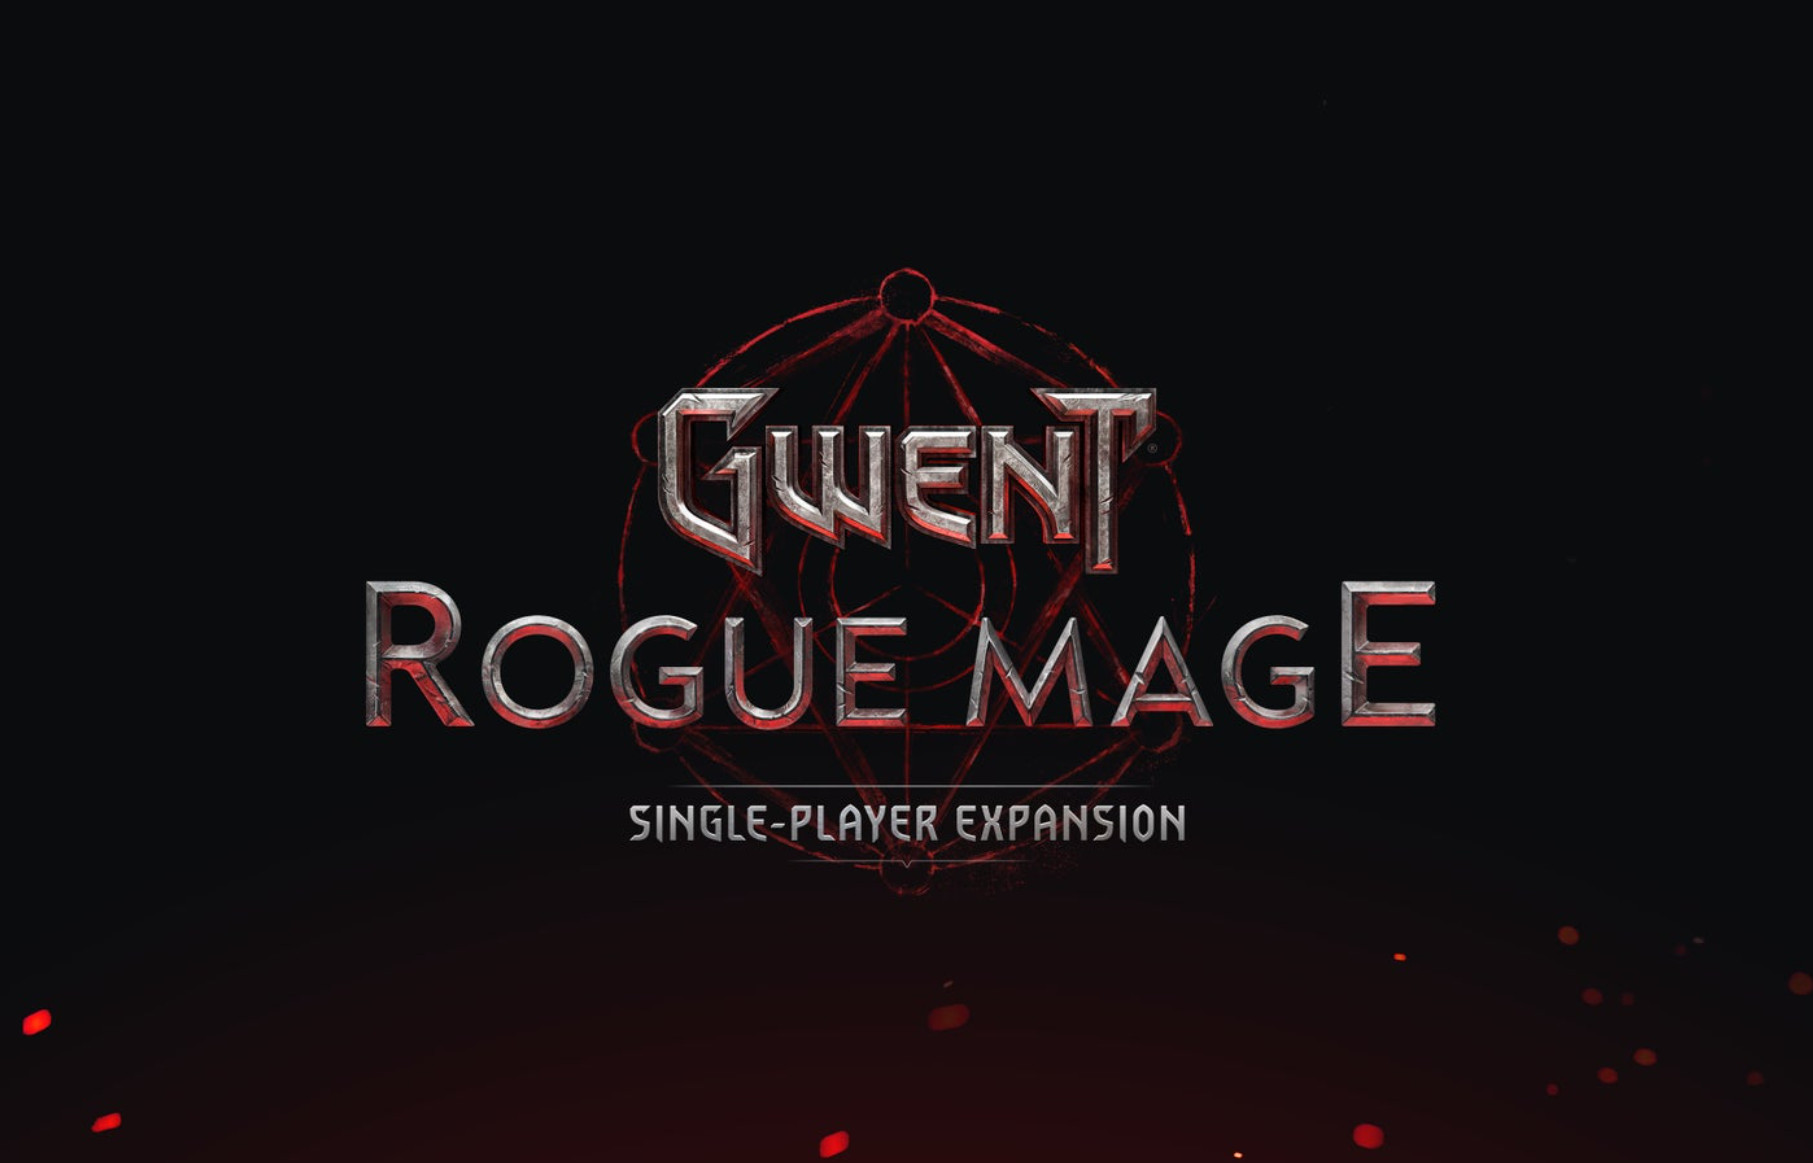 Gwent: Rogue Mage Single-Player Expansion